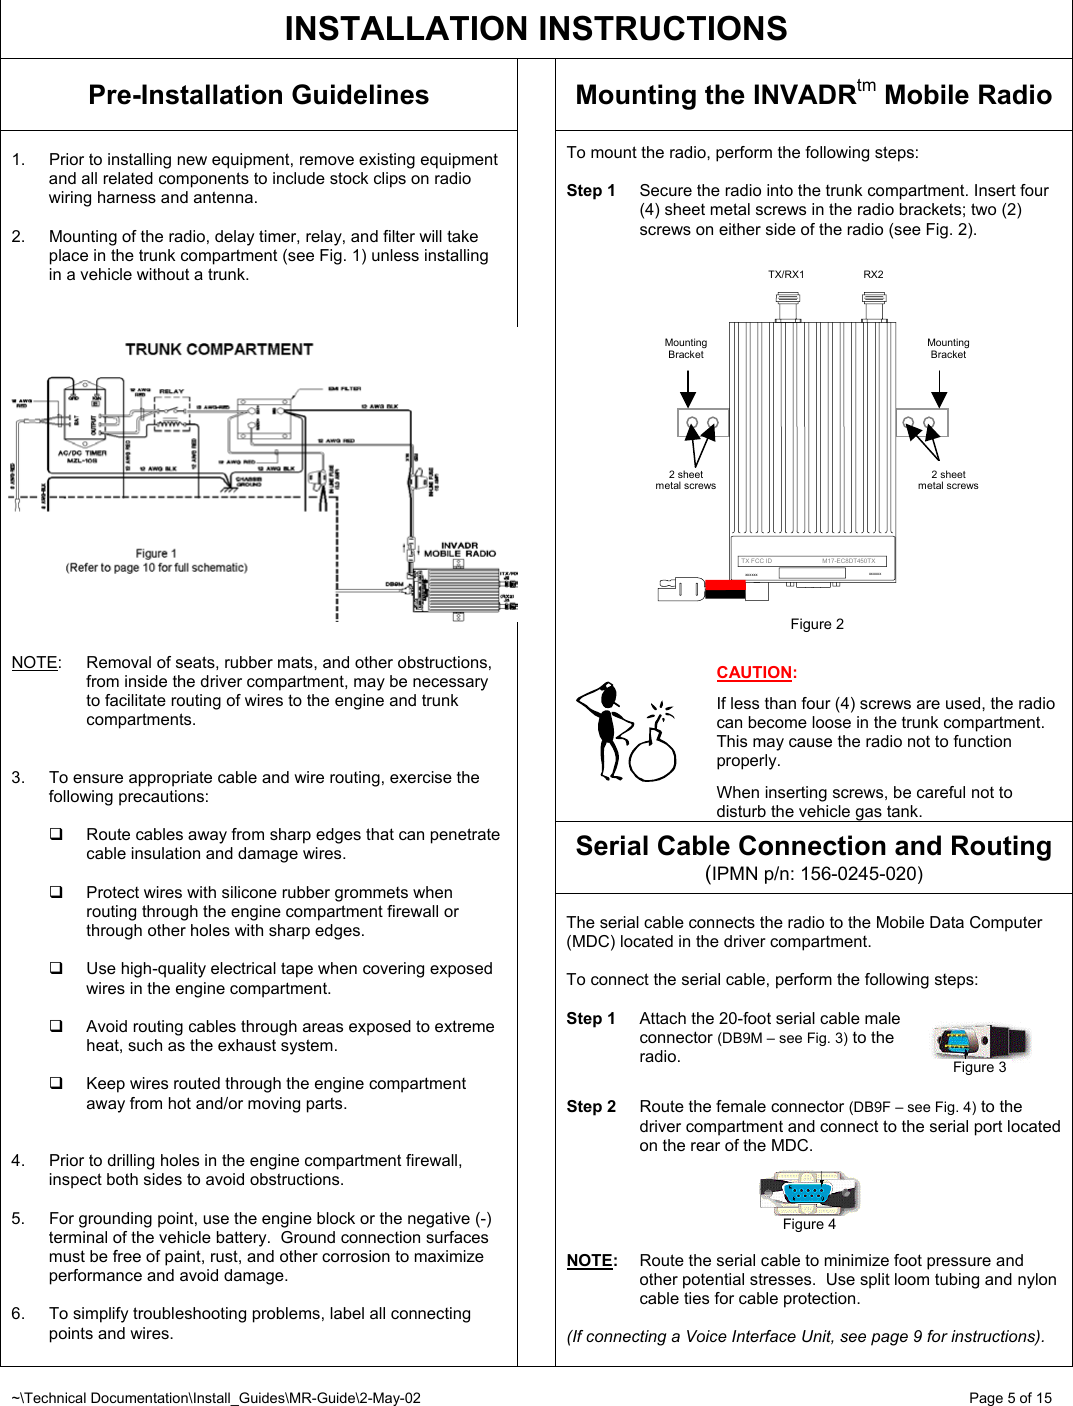 ~\Technical Documentation\Install_Guides\MR-Guide\2-May-02   Page 5 of 15 2 sheet metal screws Mounting Bracket  TX/RX1  RX2 Mounting Bracket      TX FCC ID                             M17-EC8DT450TX xxxxxxxxxxxx2 sheet metal screws Figure 2   INSTALLATION INSTRUCTIONS Pre-Installation Guidelines  Mounting the INVADRtm Mobile Radio  To mount the radio, perform the following steps:   Step 1  Secure the radio into the trunk compartment. Insert four (4) sheet metal screws in the radio brackets; two (2) screws on either side of the radio (see Fig. 2).                       CAUTION:  If less than four (4) screws are used, the radio can become loose in the trunk compartment.  This may cause the radio not to function properly.   When inserting screws, be careful not to disturb the vehicle gas tank. Serial Cable Connection and Routing (IPMN p/n: 156-0245-020)  1.  Prior to installing new equipment, remove existing equipment and all related components to include stock clips on radio wiring harness and antenna.  2.  Mounting of the radio, delay timer, relay, and filter will take place in the trunk compartment (see Fig. 1) unless installing in a vehicle without a trunk.     NOTE: Removal of seats, rubber mats, and other obstructions, from inside the driver compartment, may be necessary to facilitate routing of wires to the engine and trunk compartments.   3.  To ensure appropriate cable and wire routing, exercise the following precautions:    Route cables away from sharp edges that can penetrate cable insulation and damage wires.    Protect wires with silicone rubber grommets when routing through the engine compartment firewall or through other holes with sharp edges.    Use high-quality electrical tape when covering exposed wires in the engine compartment.    Avoid routing cables through areas exposed to extreme heat, such as the exhaust system.    Keep wires routed through the engine compartment away from hot and/or moving parts.   4.  Prior to drilling holes in the engine compartment firewall, inspect both sides to avoid obstructions.  5.  For grounding point, use the engine block or the negative (-) terminal of the vehicle battery.  Ground connection surfaces must be free of paint, rust, and other corrosion to maximize performance and avoid damage.  6.  To simplify troubleshooting problems, label all connecting points and wires.     The serial cable connects the radio to the Mobile Data Computer (MDC) located in the driver compartment.  To connect the serial cable, perform the following steps:  Step 1  Attach the 20-foot serial cable male  connector (DB9M – see Fig. 3) to the  radio.   Step 2  Route the female connector (DB9F – see Fig. 4) to the driver compartment and connect to the serial port located on the rear of the MDC.      NOTE:  Route the serial cable to minimize foot pressure and other potential stresses.  Use split loom tubing and nylon cable ties for cable protection.   (If connecting a Voice Interface Unit, see page 9 for instructions).  Figure 3 Figure 4 